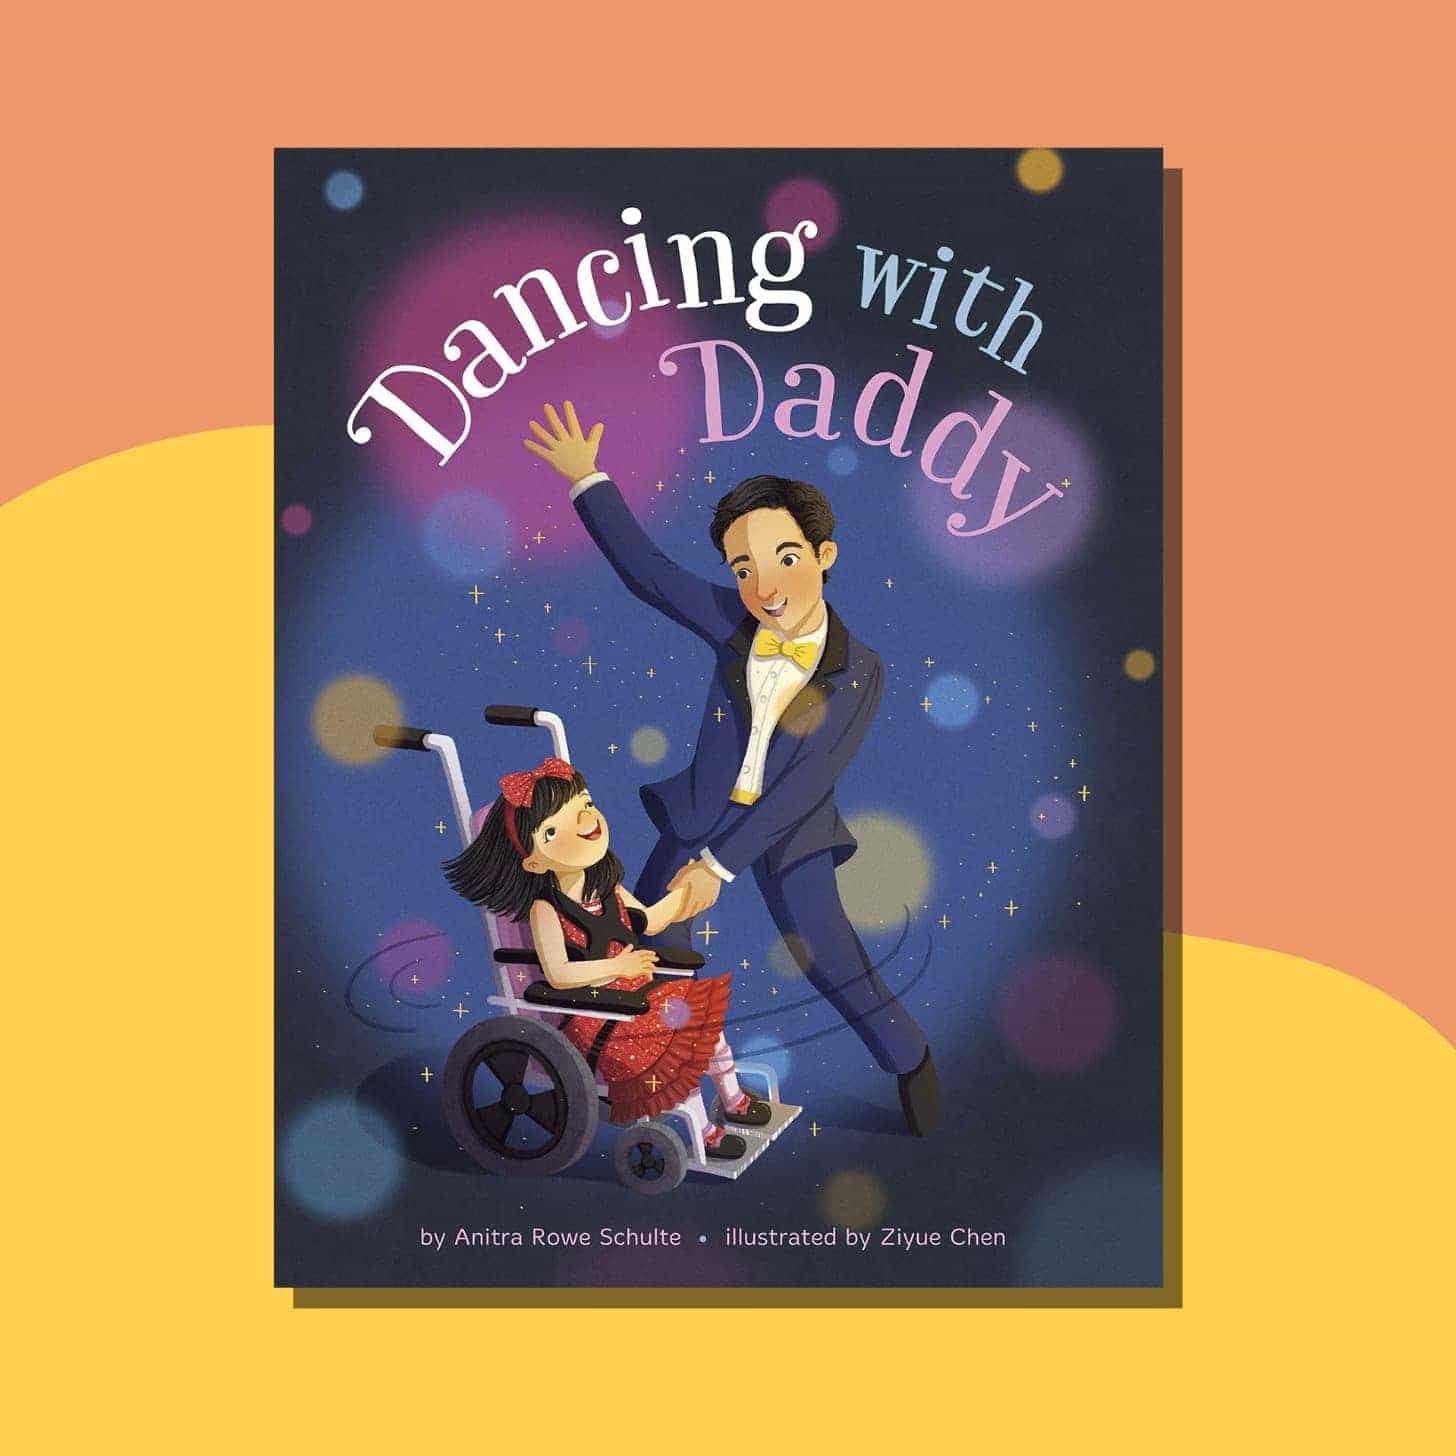 “Dancing with Daddy” by Antira Rowe Schulte - cover shows a dad in a suit dancing with his daughter in a red dress in a wheelchair